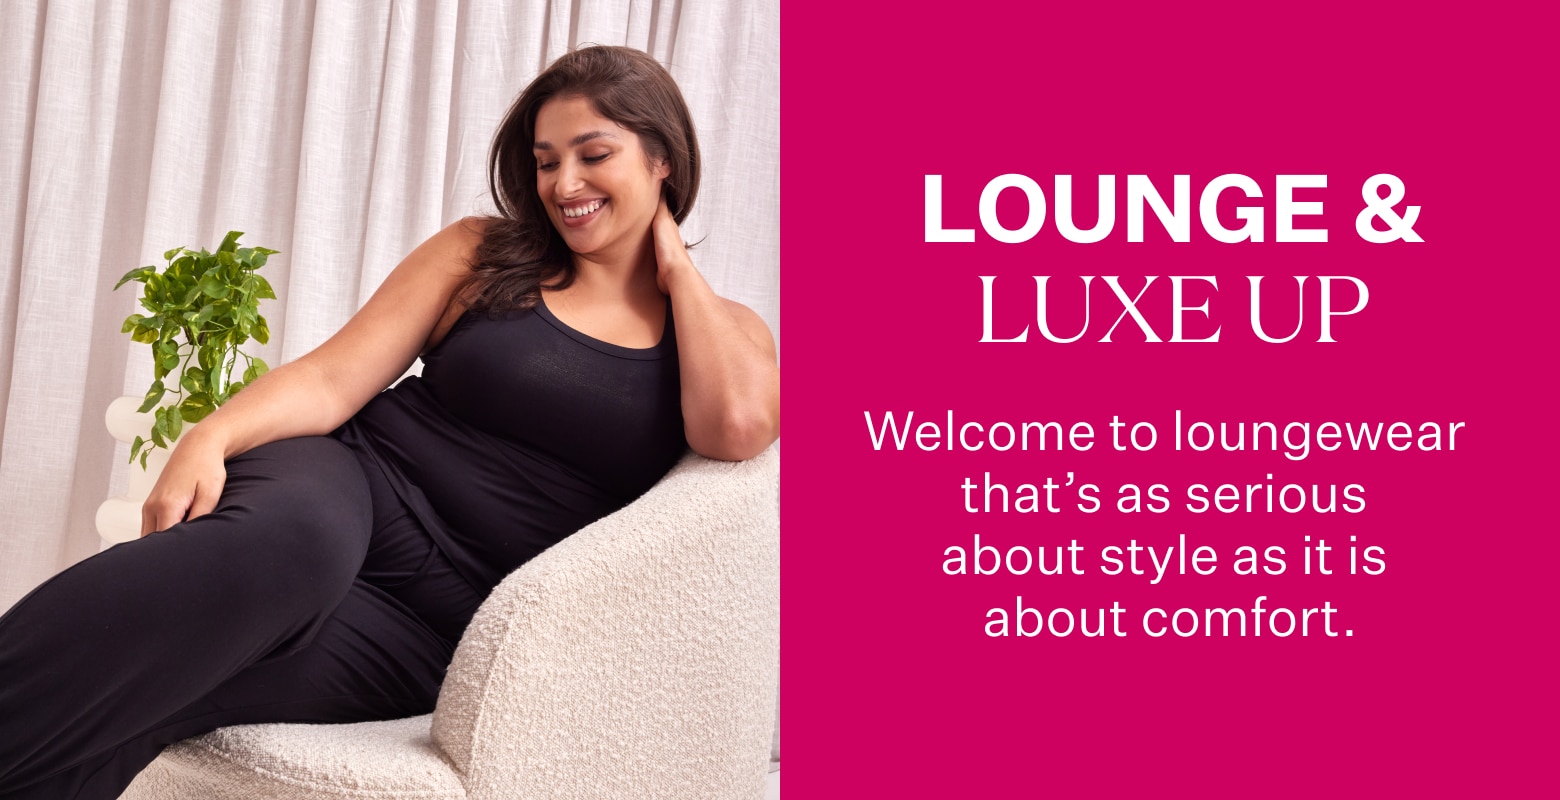 Lounge & Luxe Up. Welcome to loungewear that's as serious about style as it is about comfort.